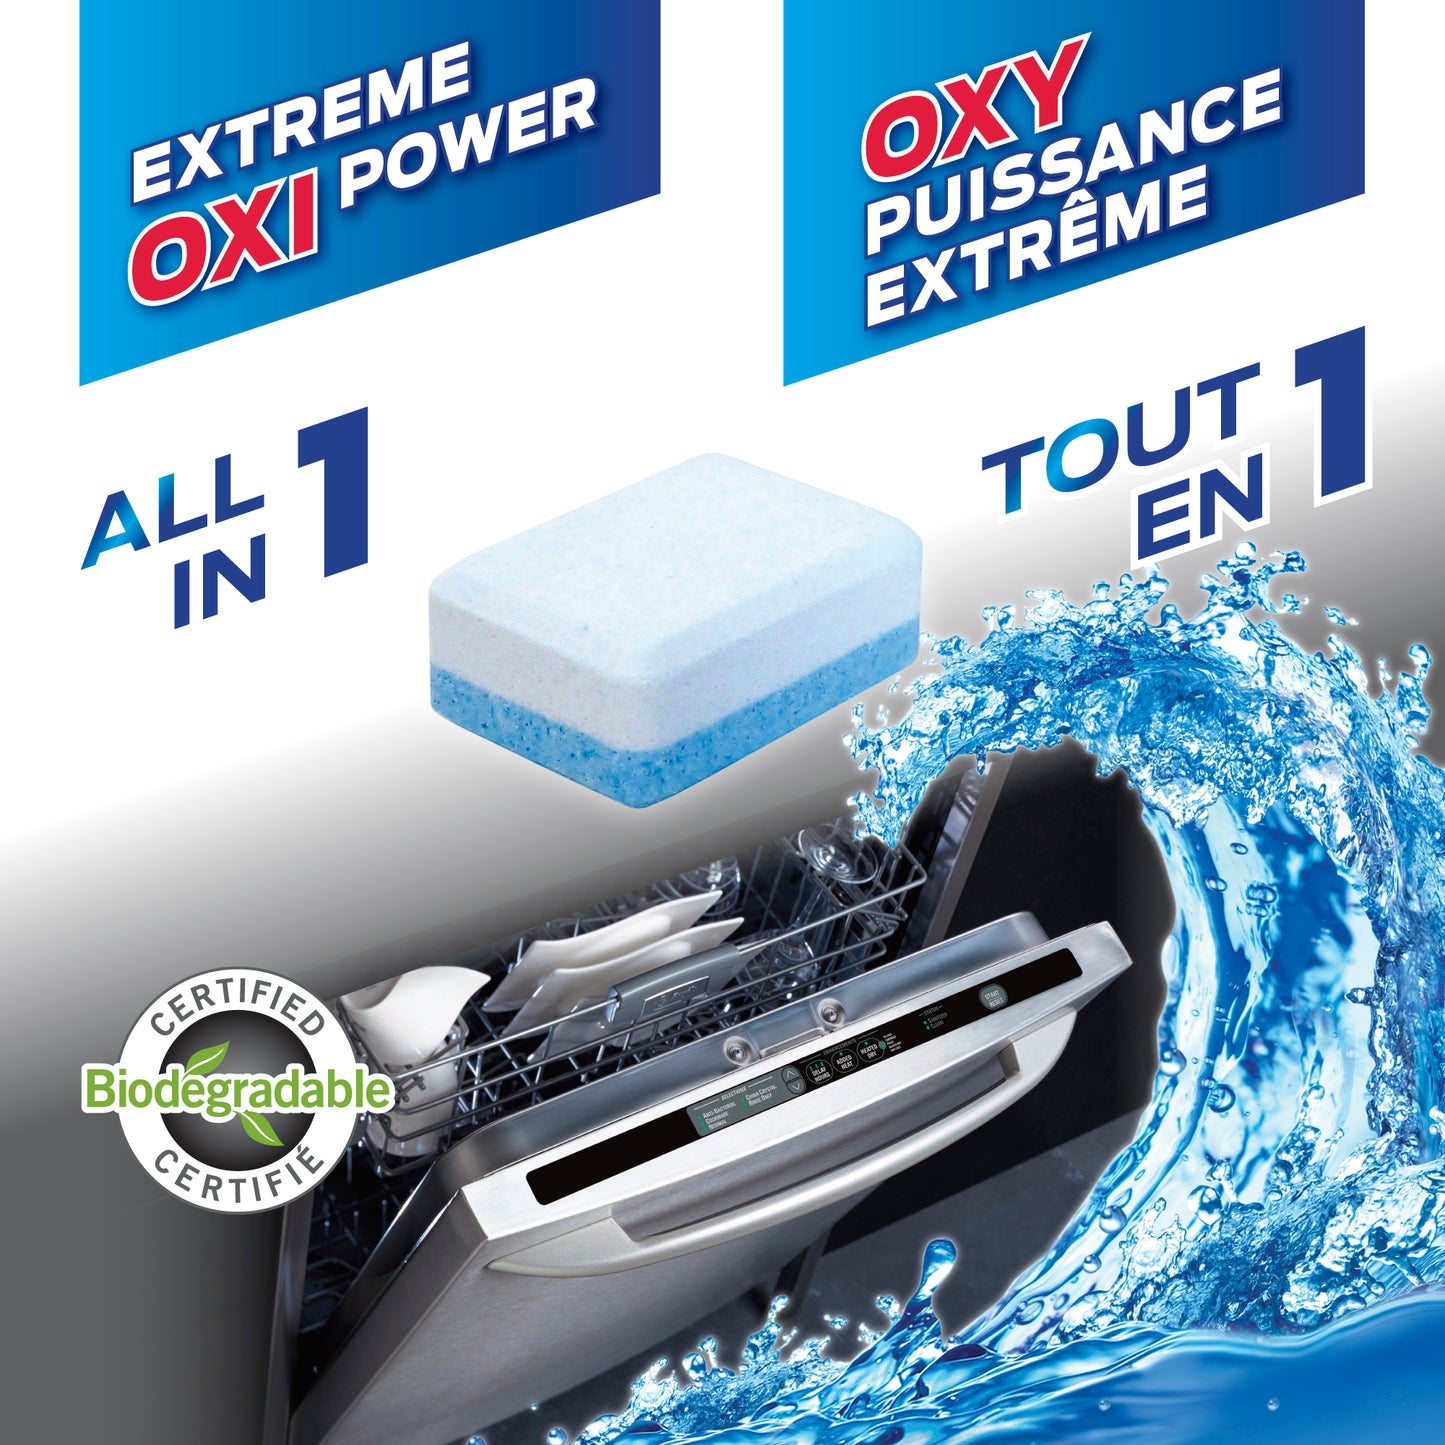 100 Dishwasher Tablets Extreme Oxi Power - All in 1